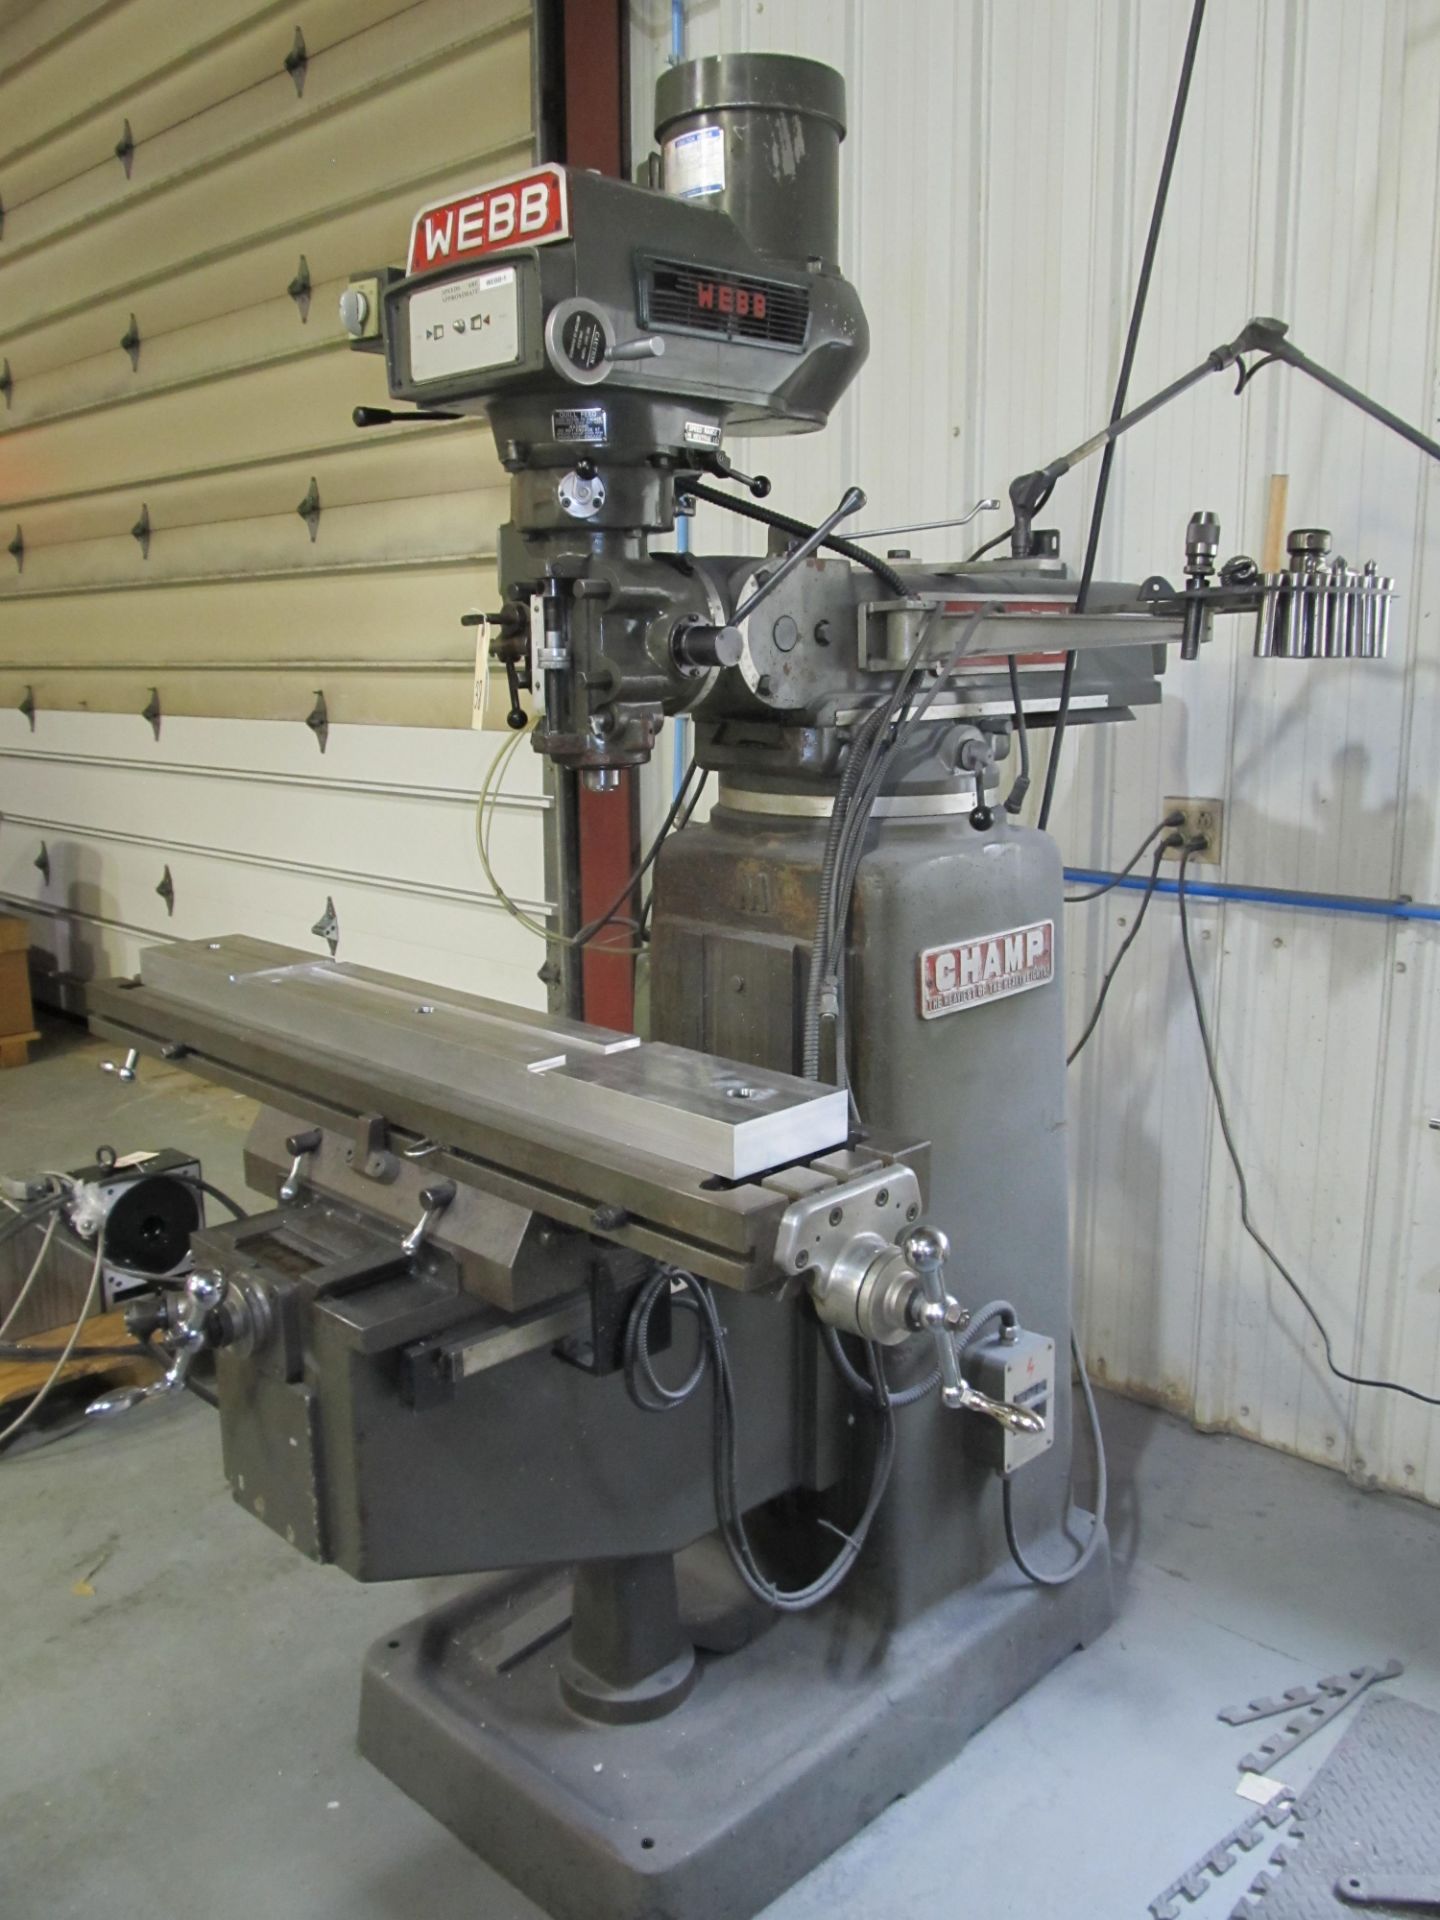 Webb/Champ Mdl.3VK 3-Axis Milling Machine w/ Knee Type 10" x 50" Table - Image 7 of 8